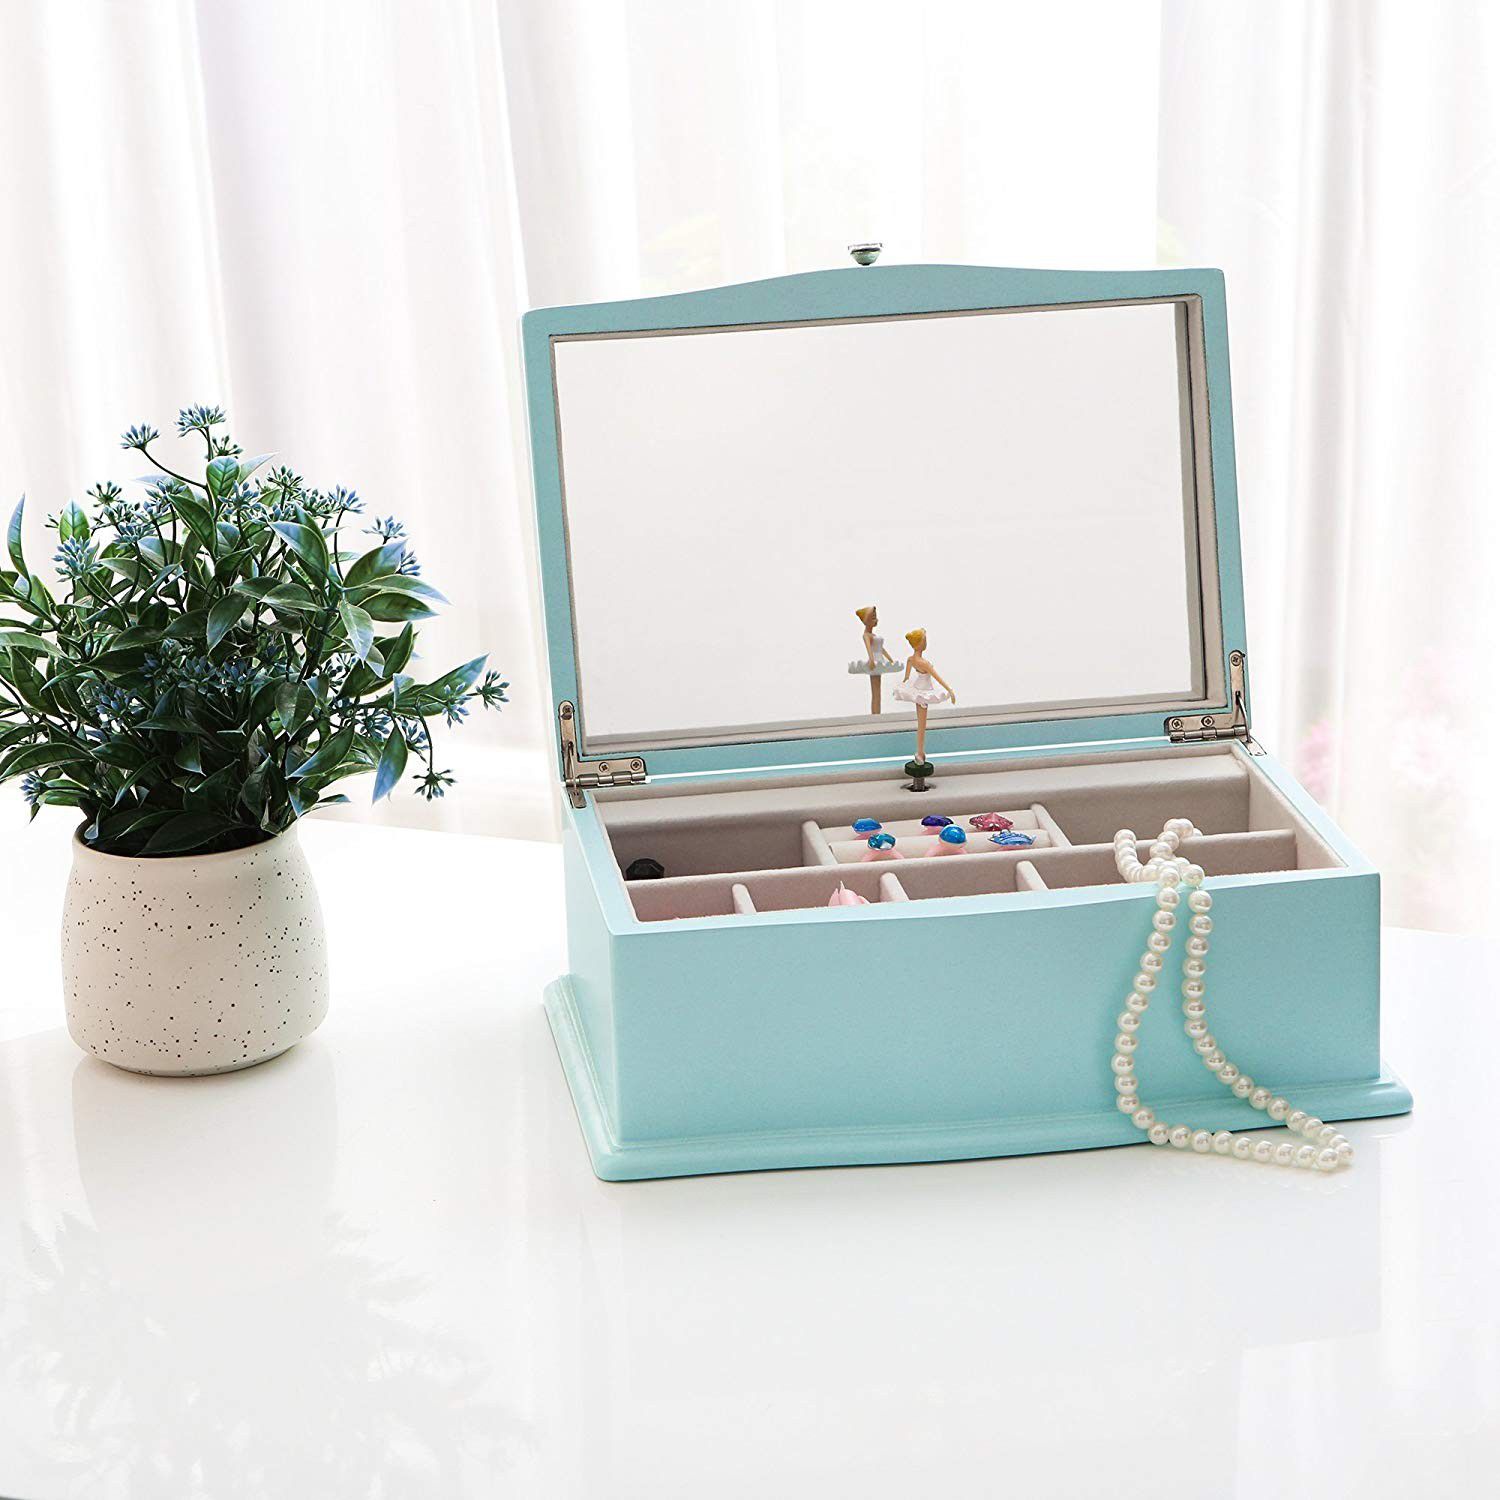 NEW Jewelry Music Box with Ballerina Girls Music Unique Tiffany Blue Wooden Musical Box with Large Mirror